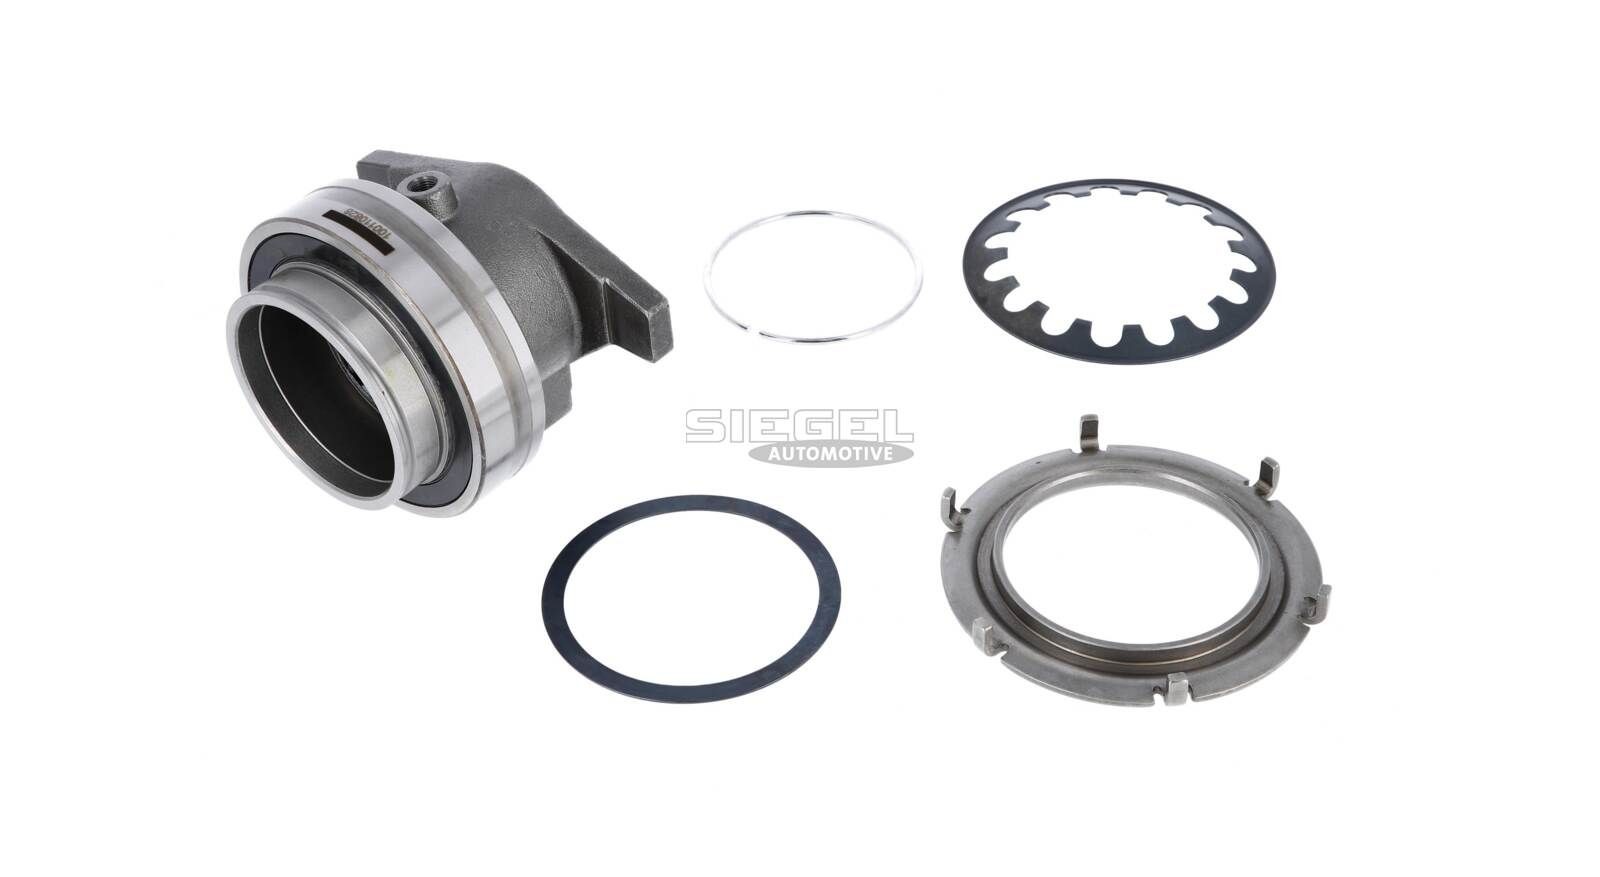 Original SA3A0011 SIEGEL AUTOMOTIVE Clutch release bearing experience and price